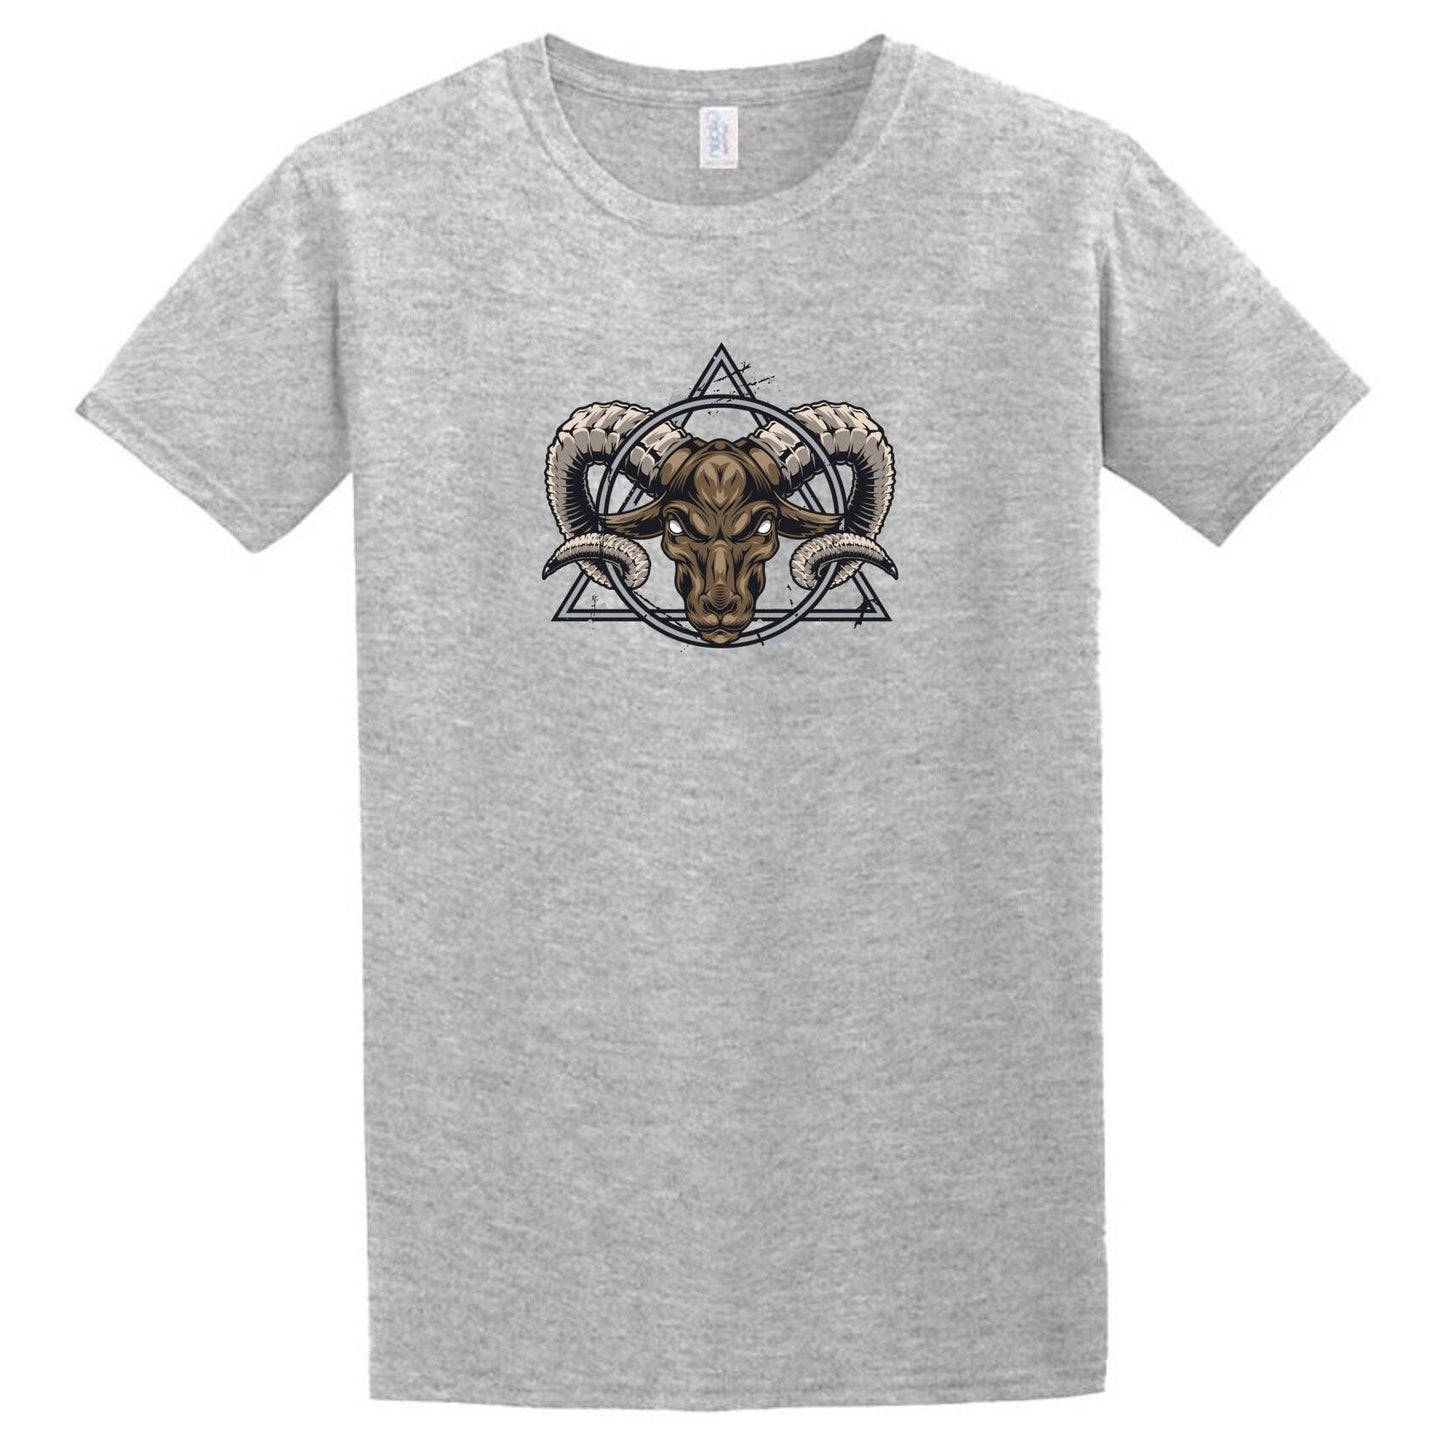 A gray Satan T-Shirt with a ram's head on it by Twisted Gifts.